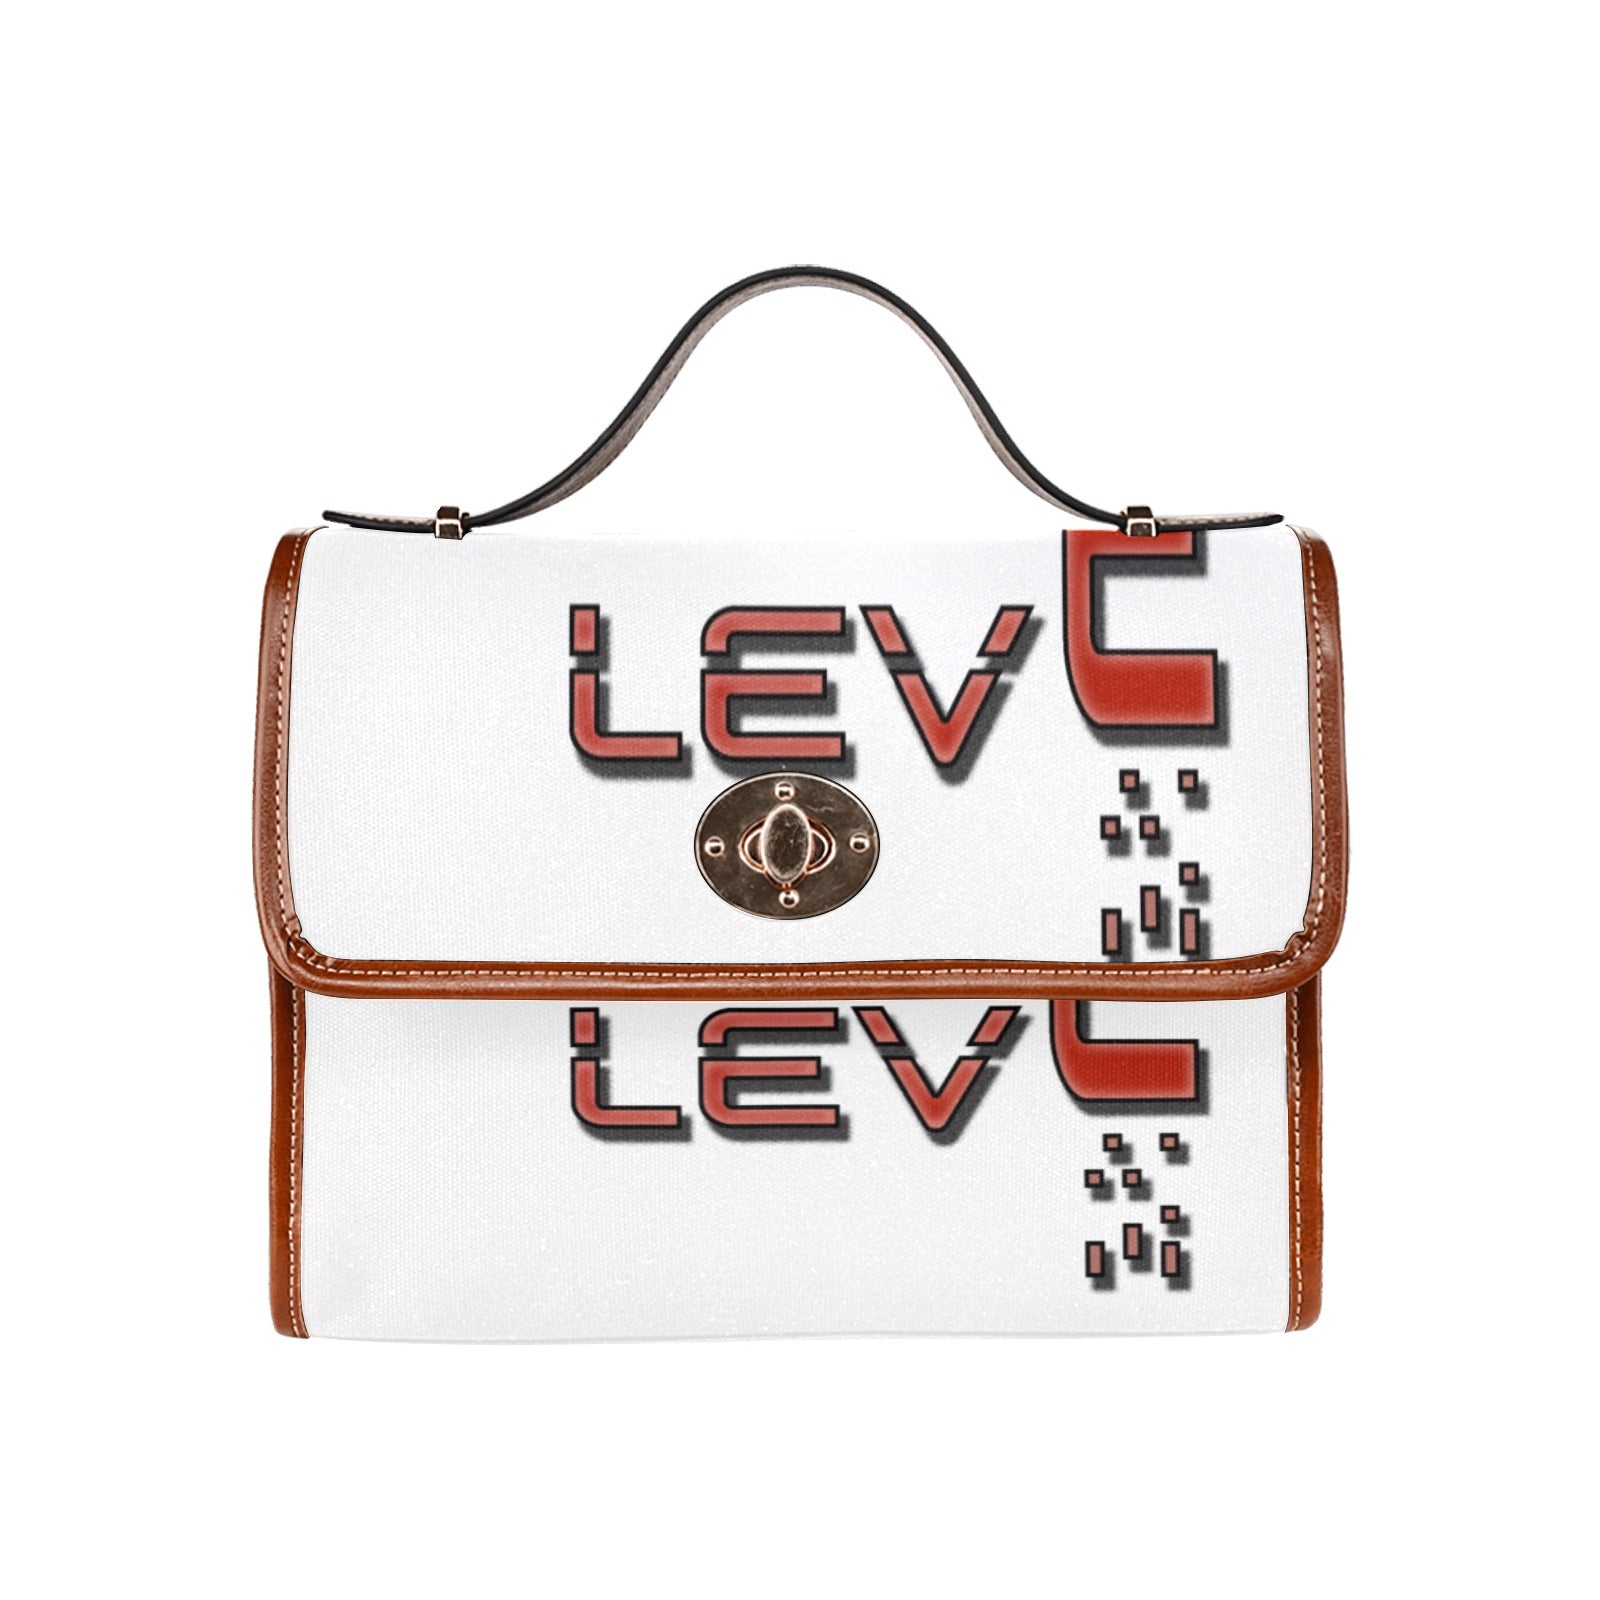 fz red levels handbag one size / fz - levels bag - white all over print waterproof canvas bag(model1641)(brown strap)